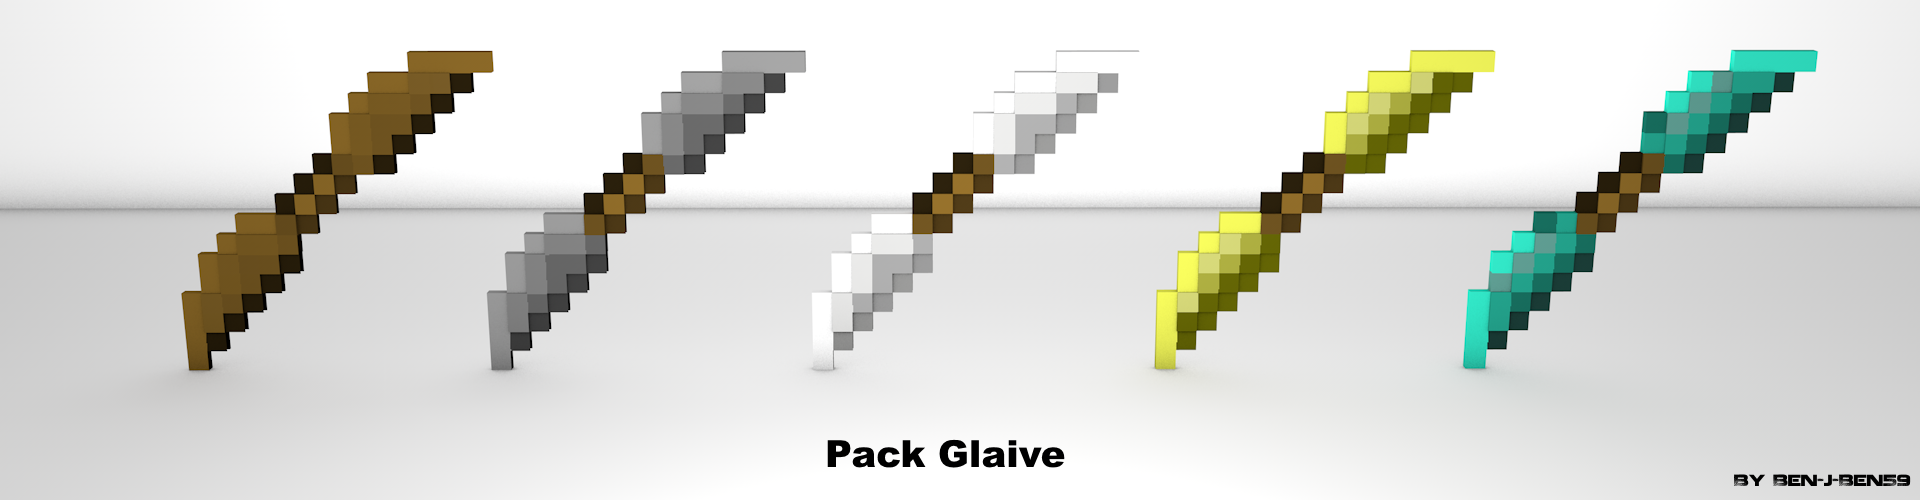 Pack Glaive.png